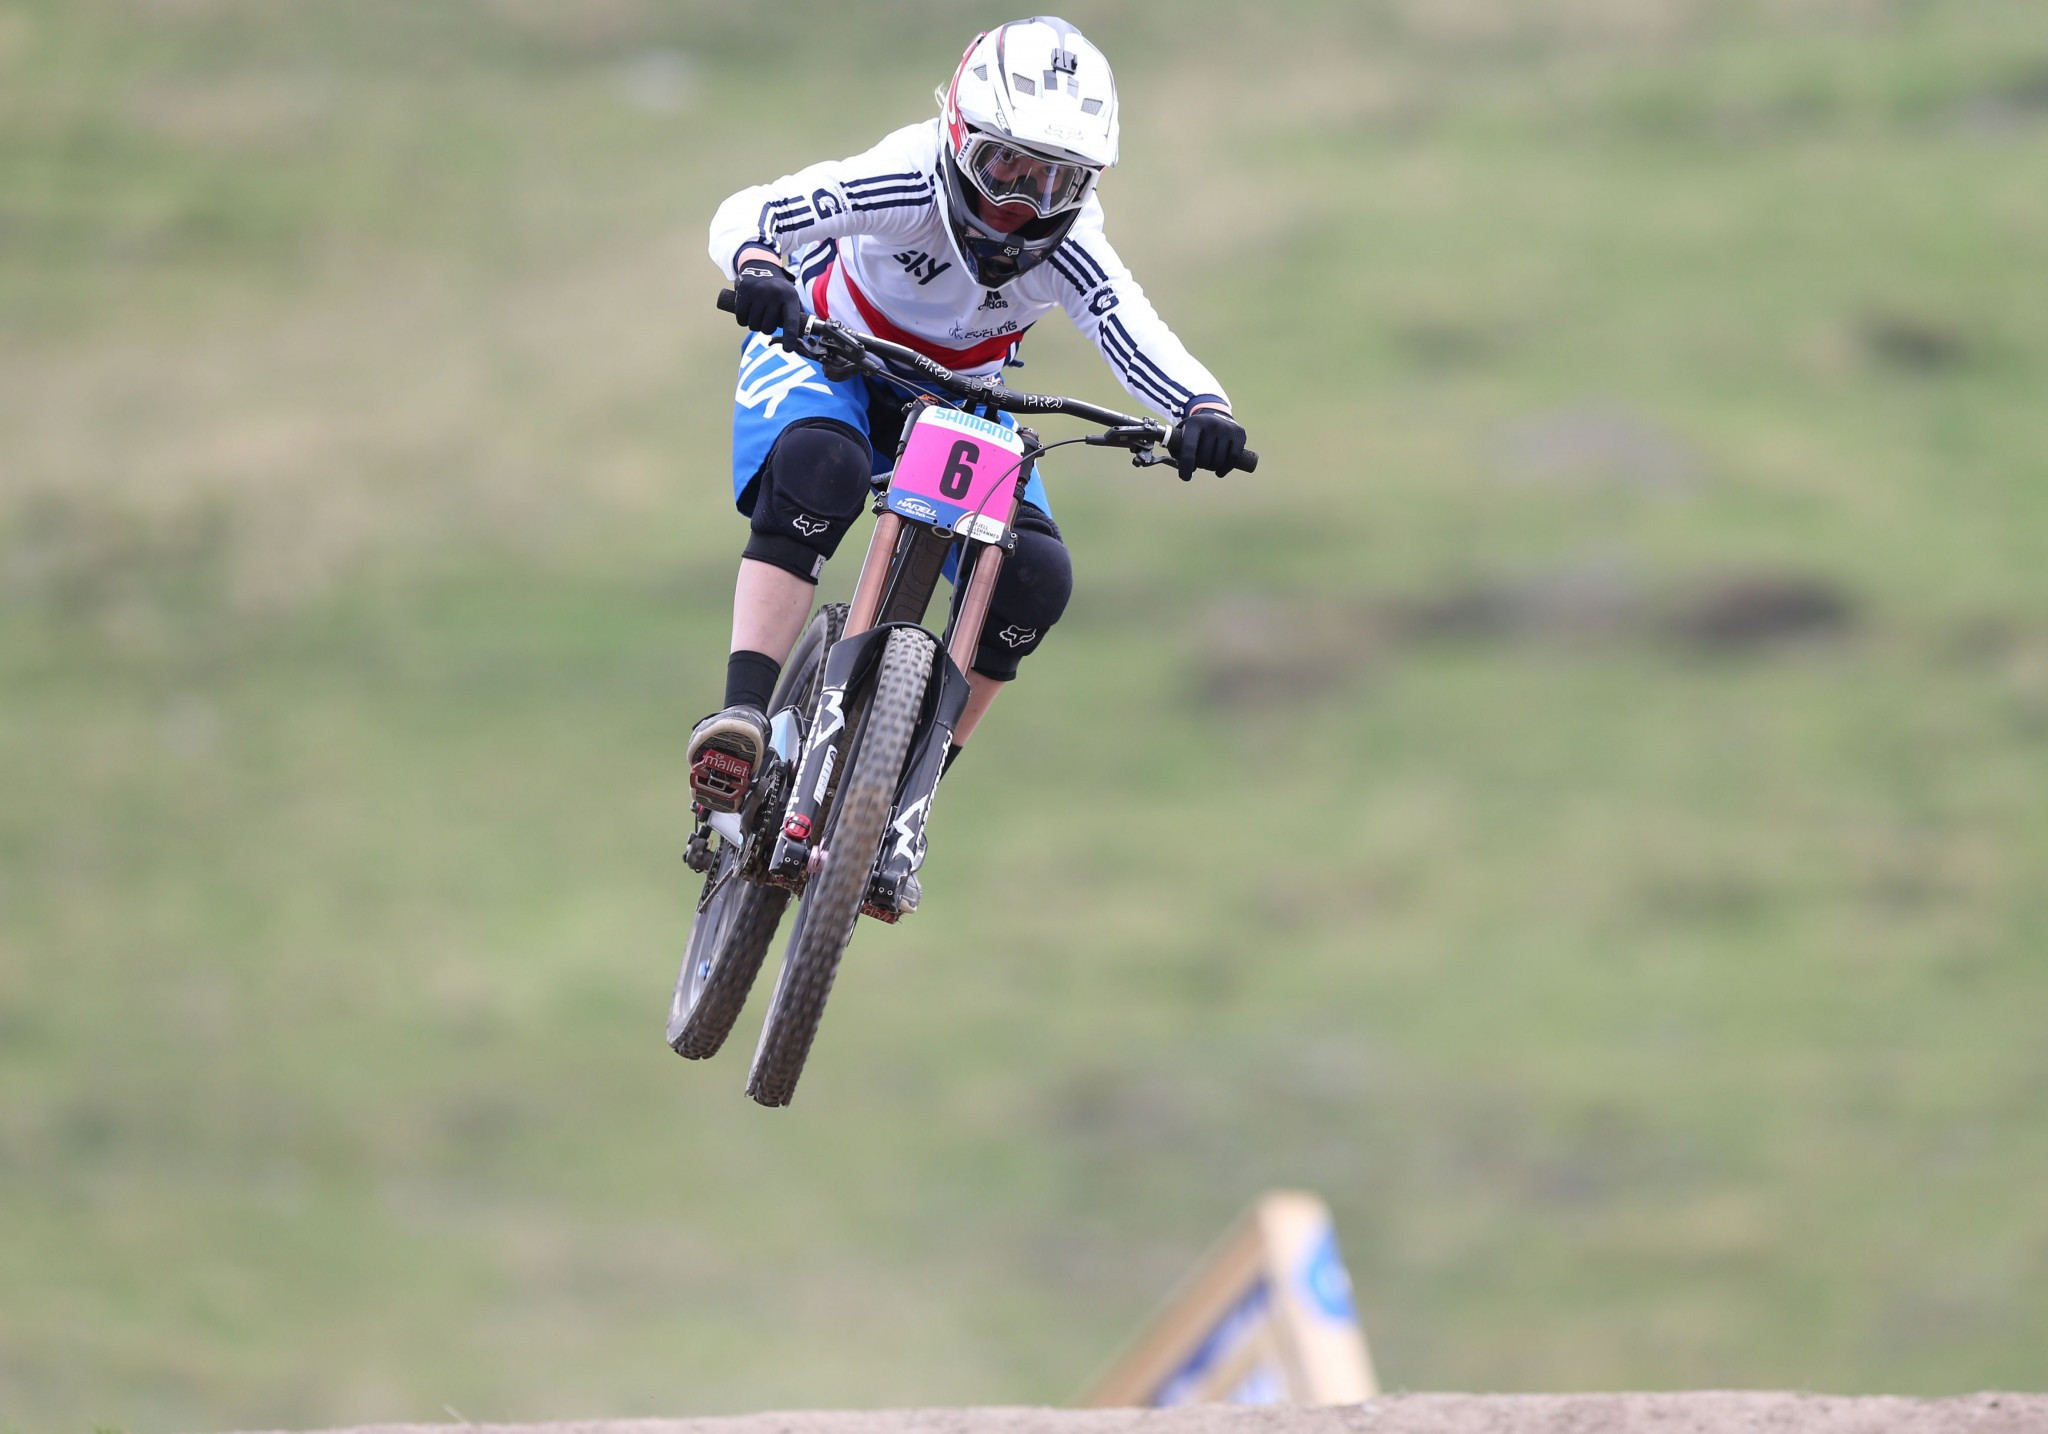 Seagrave and Gwin maintain strong form at UCI Mountain Bike World Cup Finals